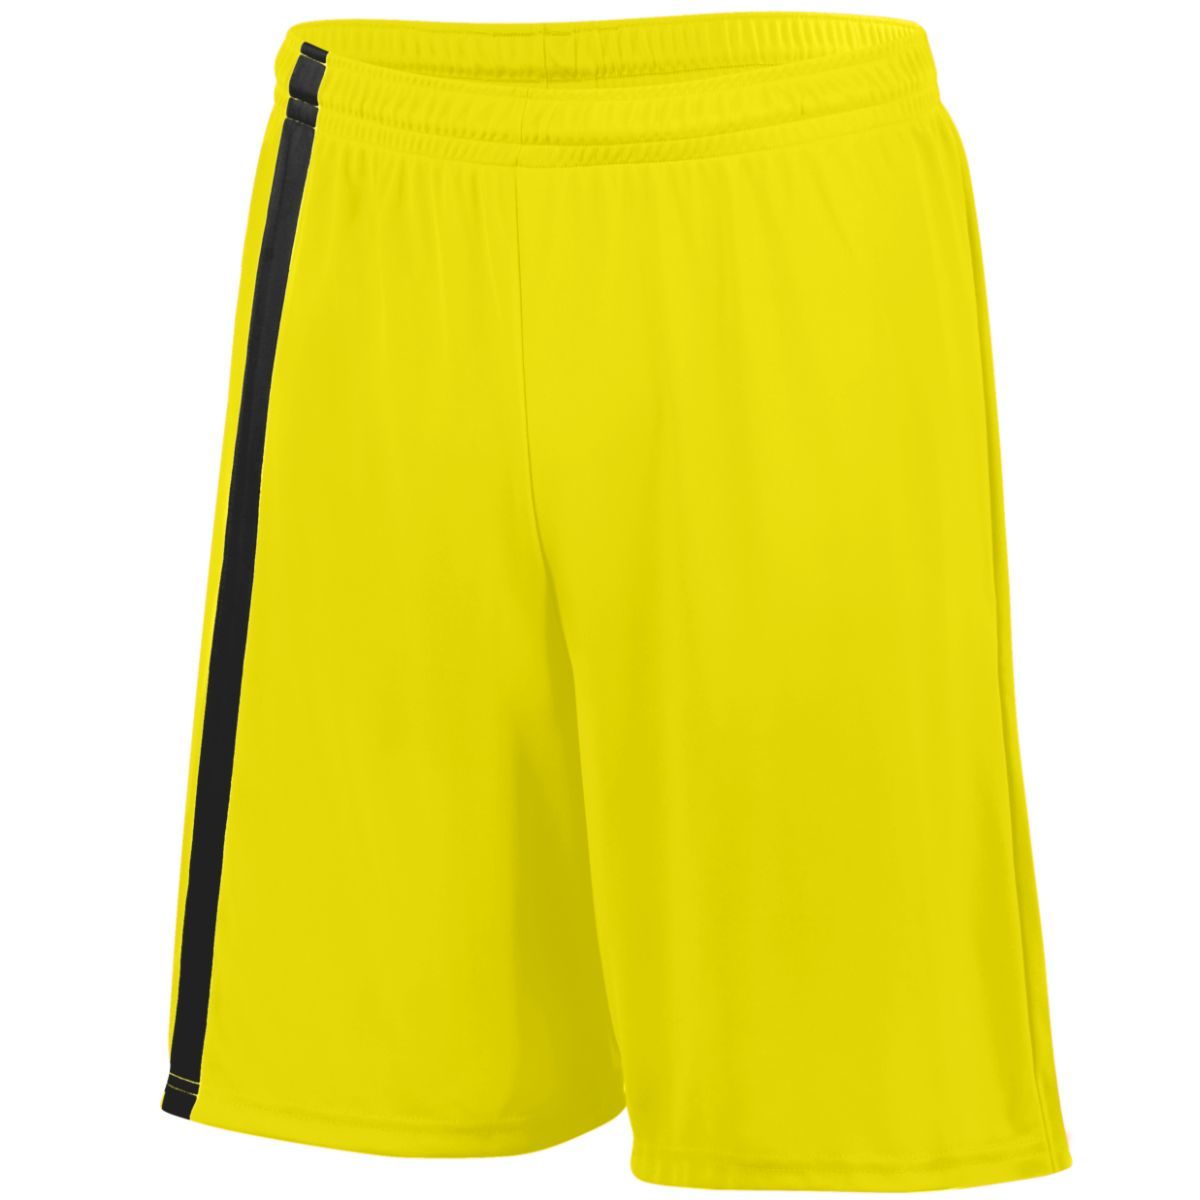 Augusta Sportswear Attacking Third Shorts in Power Yellow/Black  -Part of the Adult, Adult-Shorts, Augusta-Products, Soccer, All-Sports-1 product lines at KanaleyCreations.com